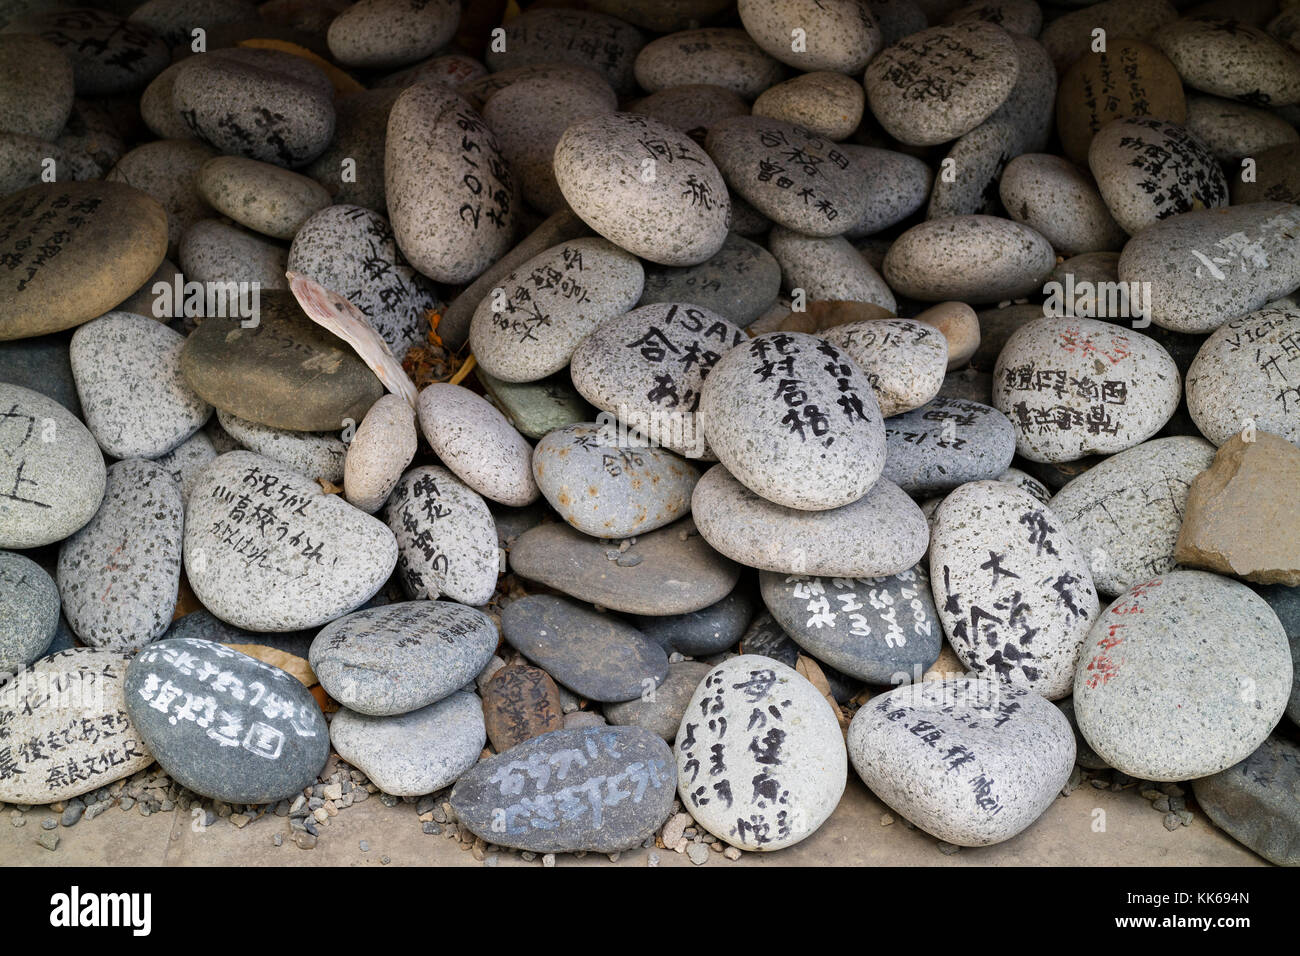 Nagano, Japan - June 5, 2017:  Special type of Ema,  wishes and prayers written on pebble stones Stock Photo